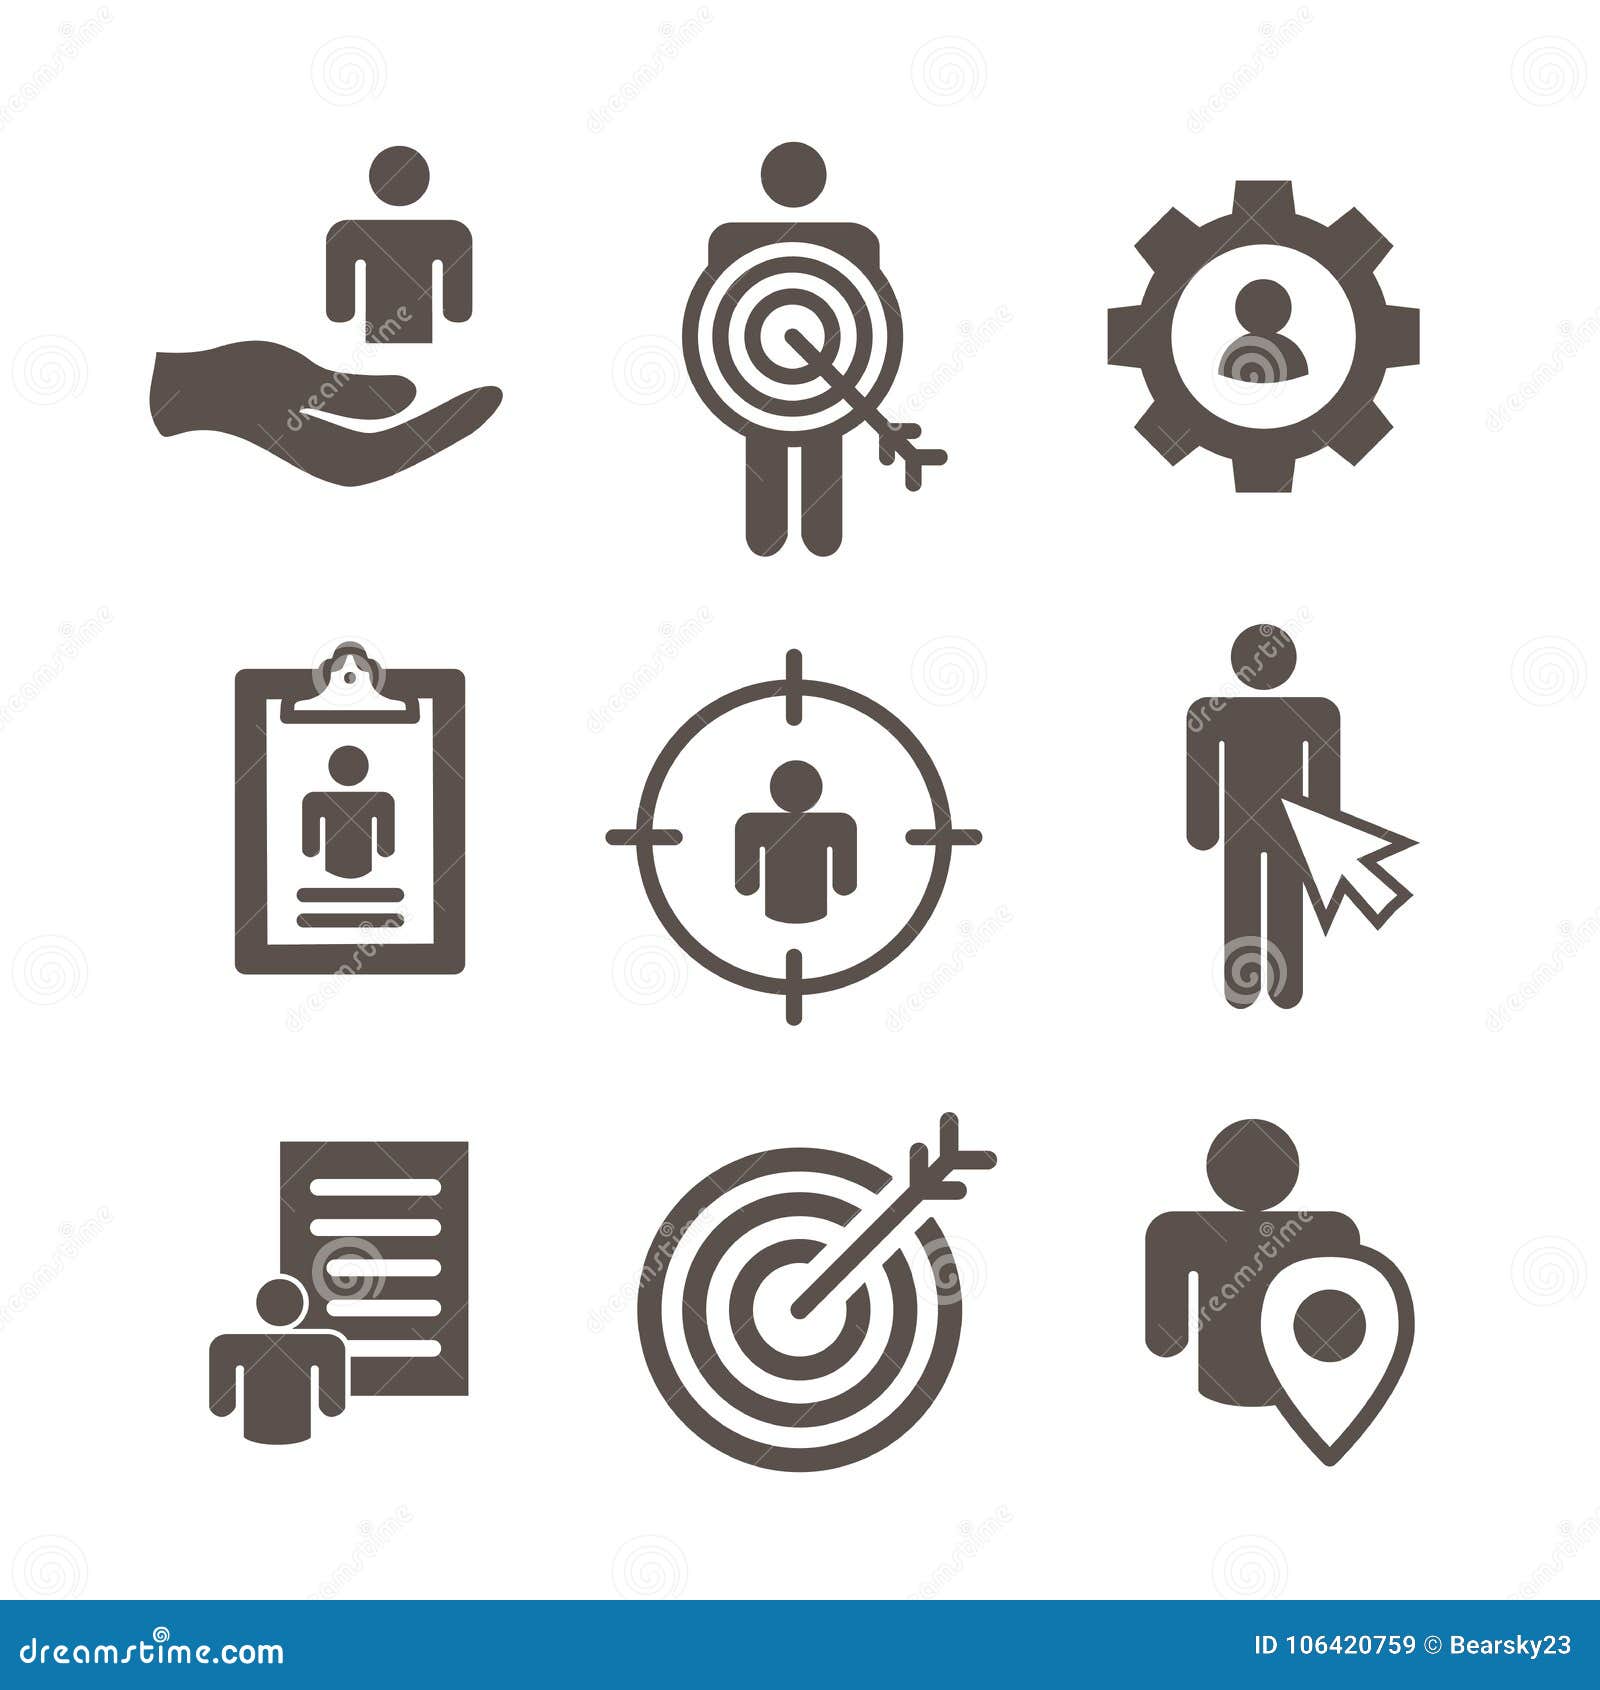 target market icons of buyer image and persona - gear, arrow, n